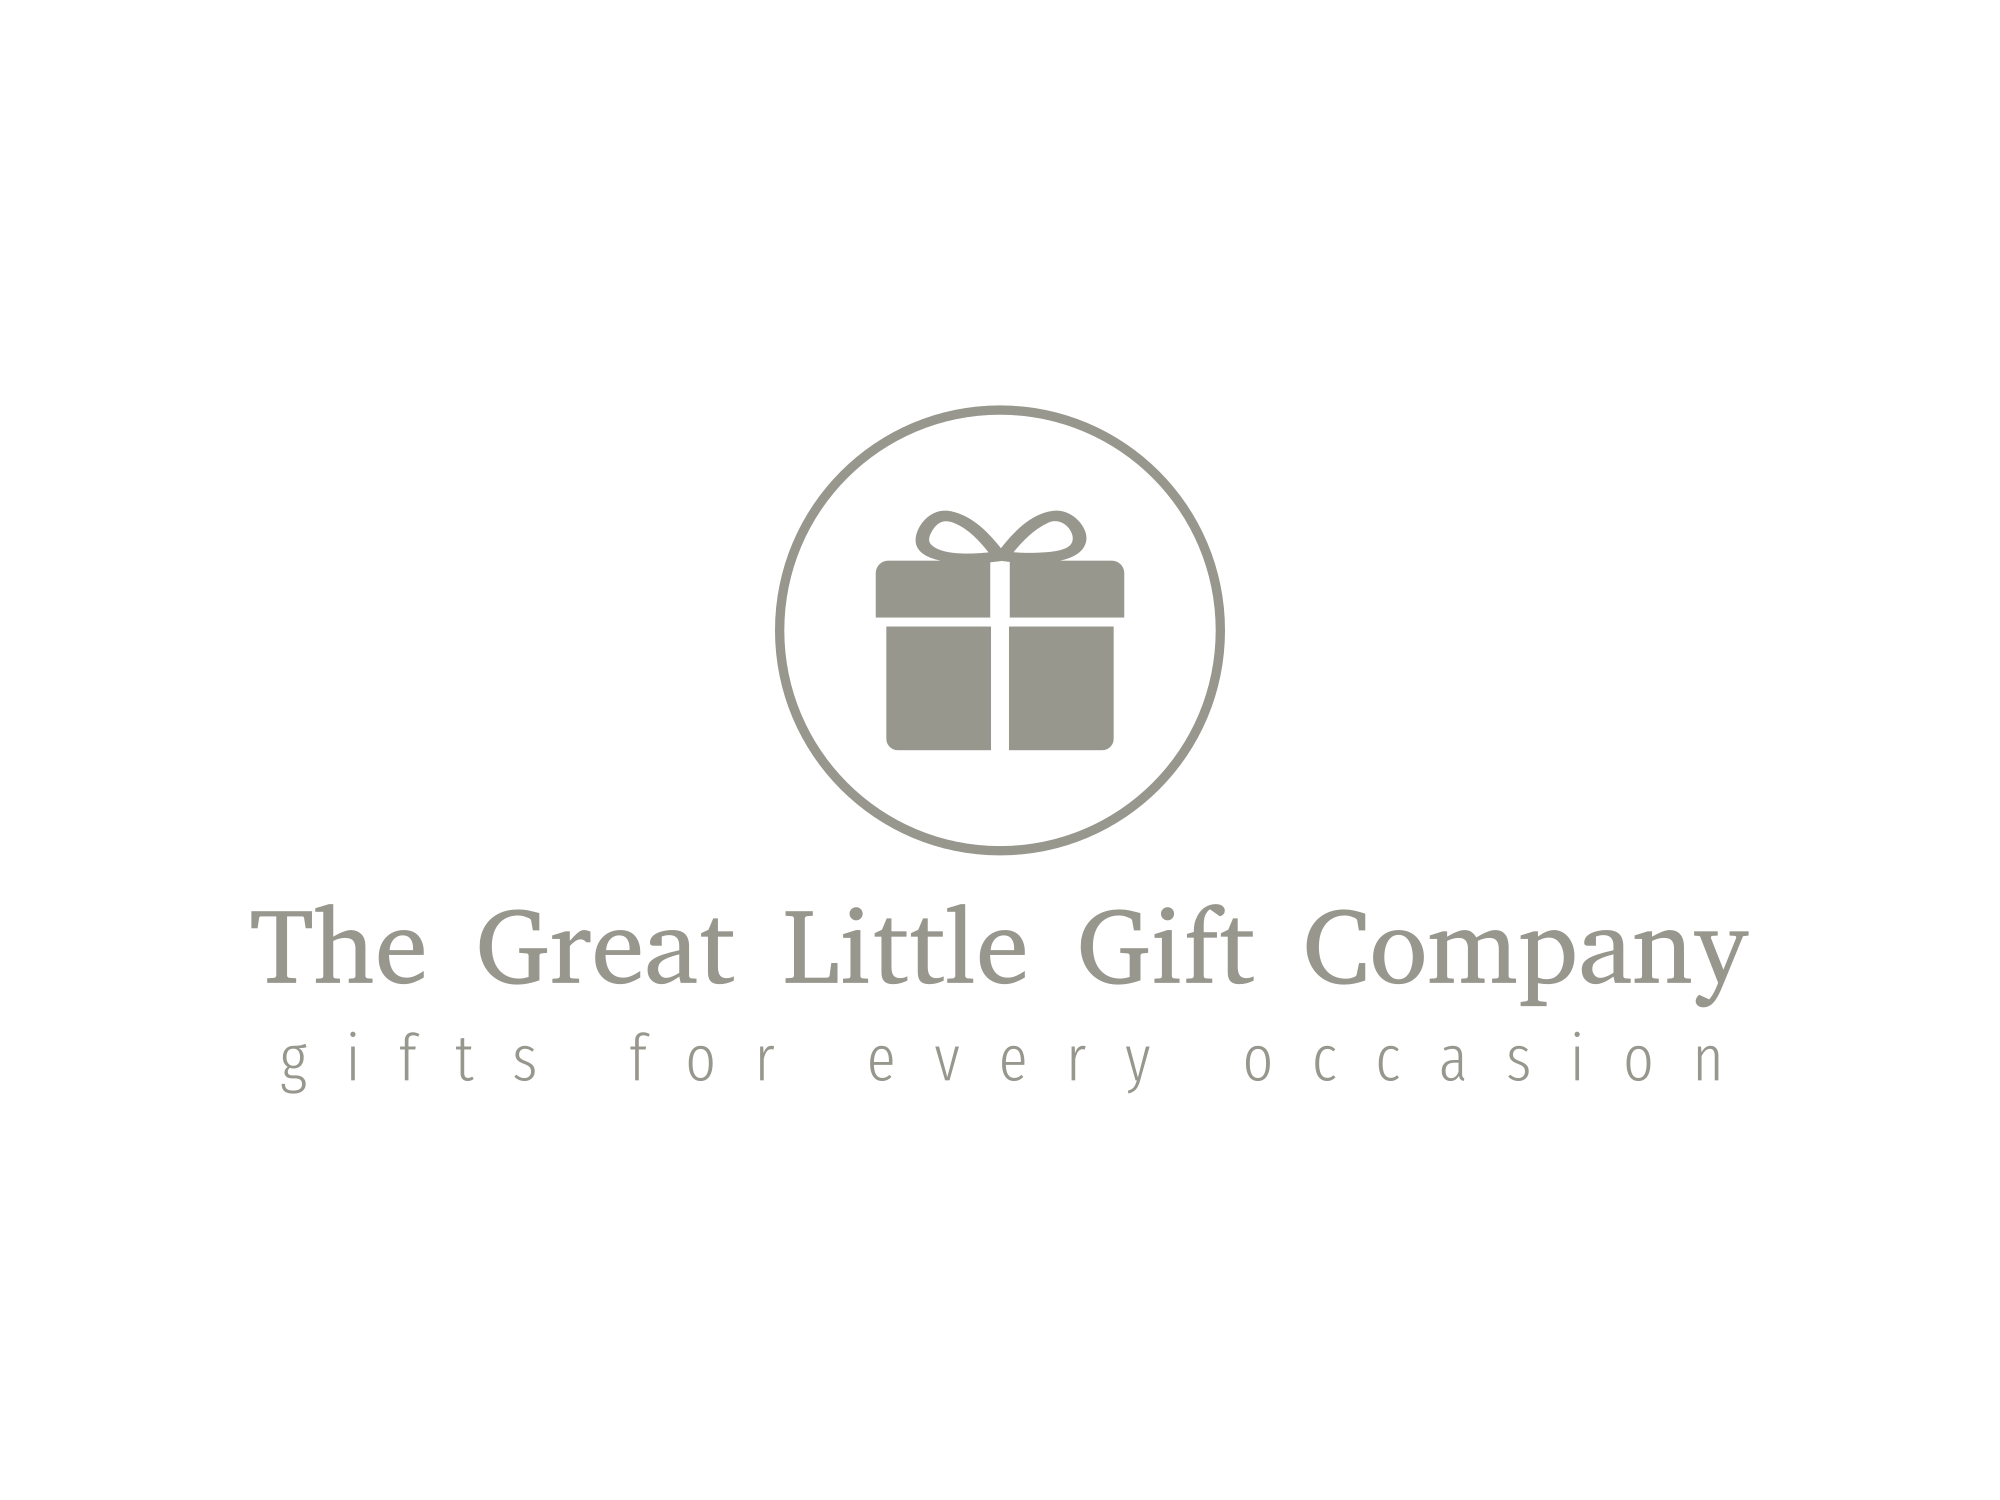 The Great Little Gift Company Logo